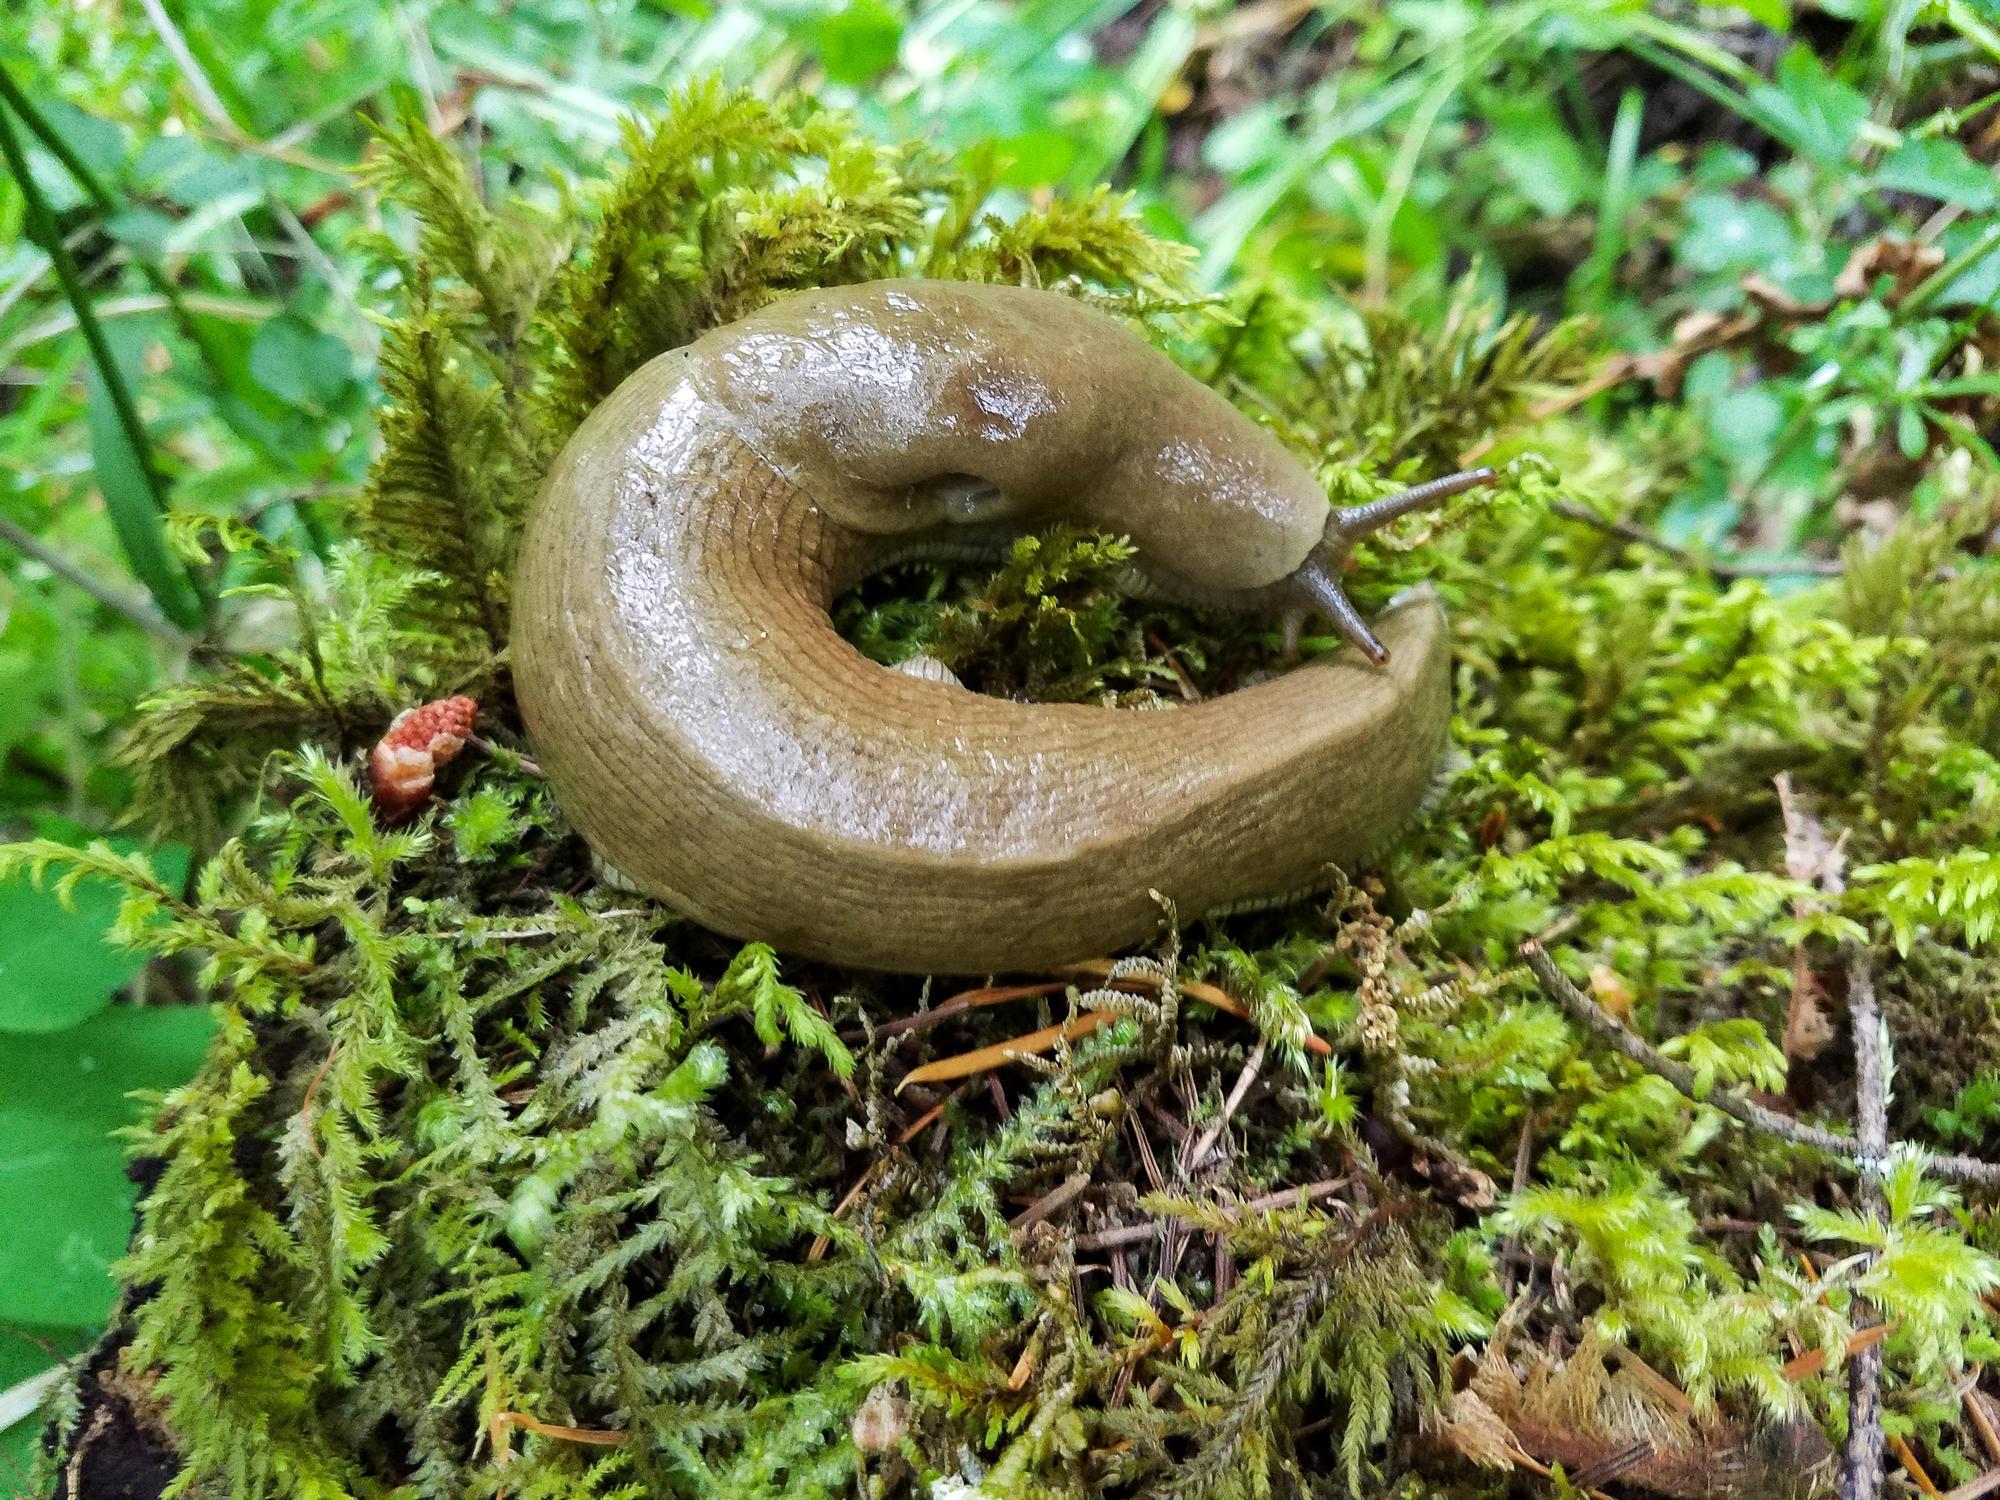 A slug curled up on a bed of moss